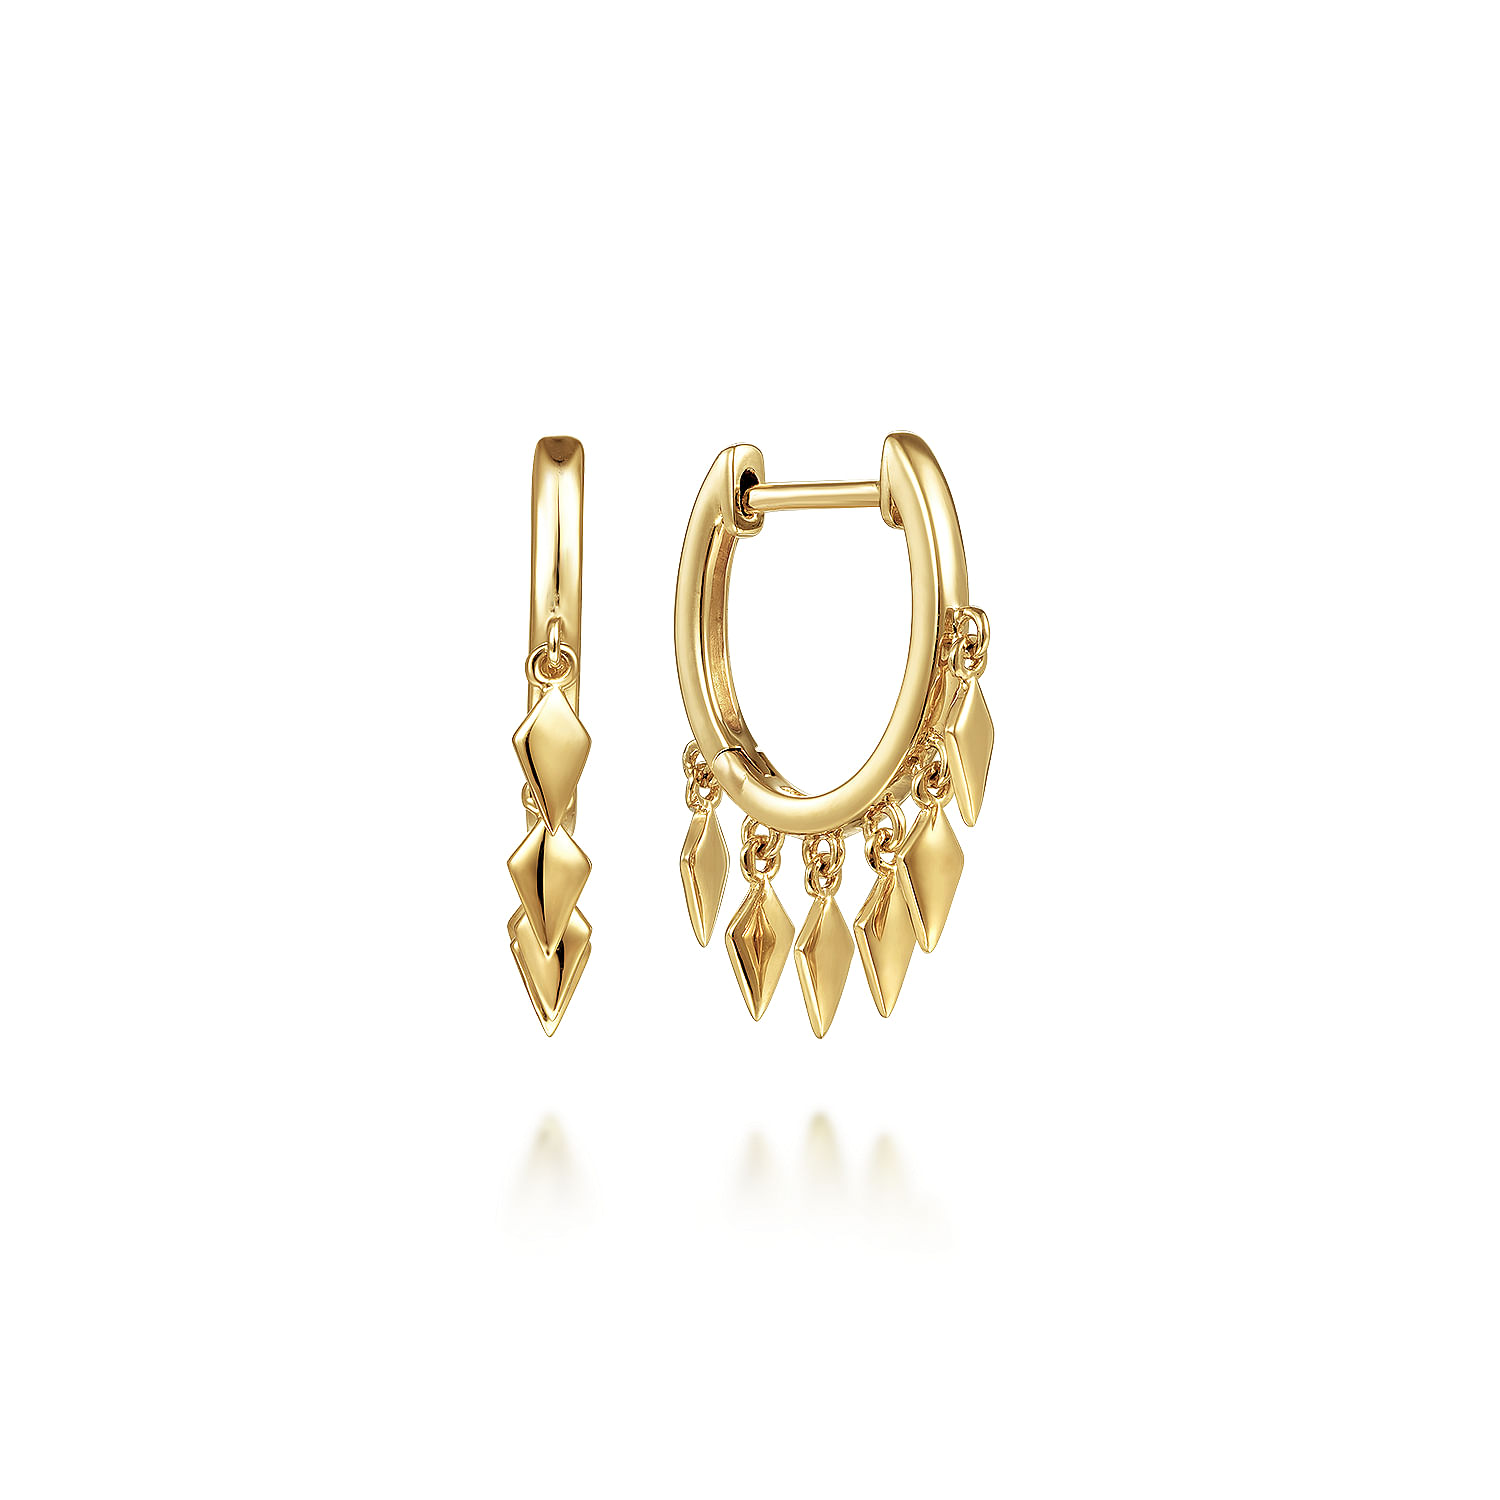 14K-Yellow-Gold-Huggie-Earrings-with-Spike-Drops1